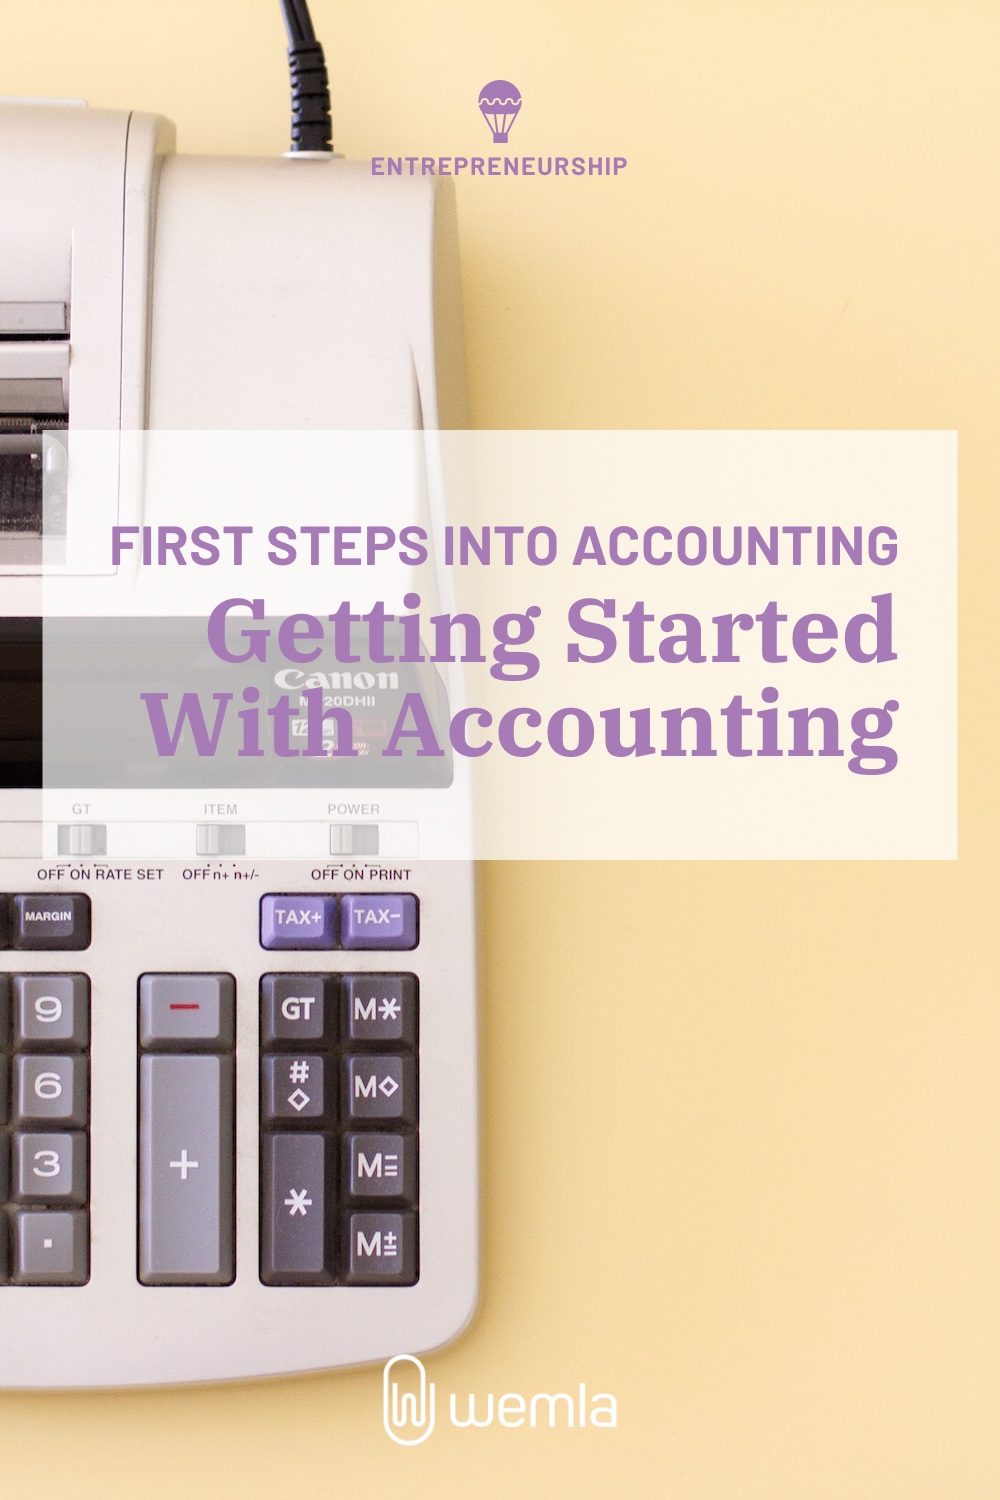 First Steps Into Accounting: Getting Started With Accounting